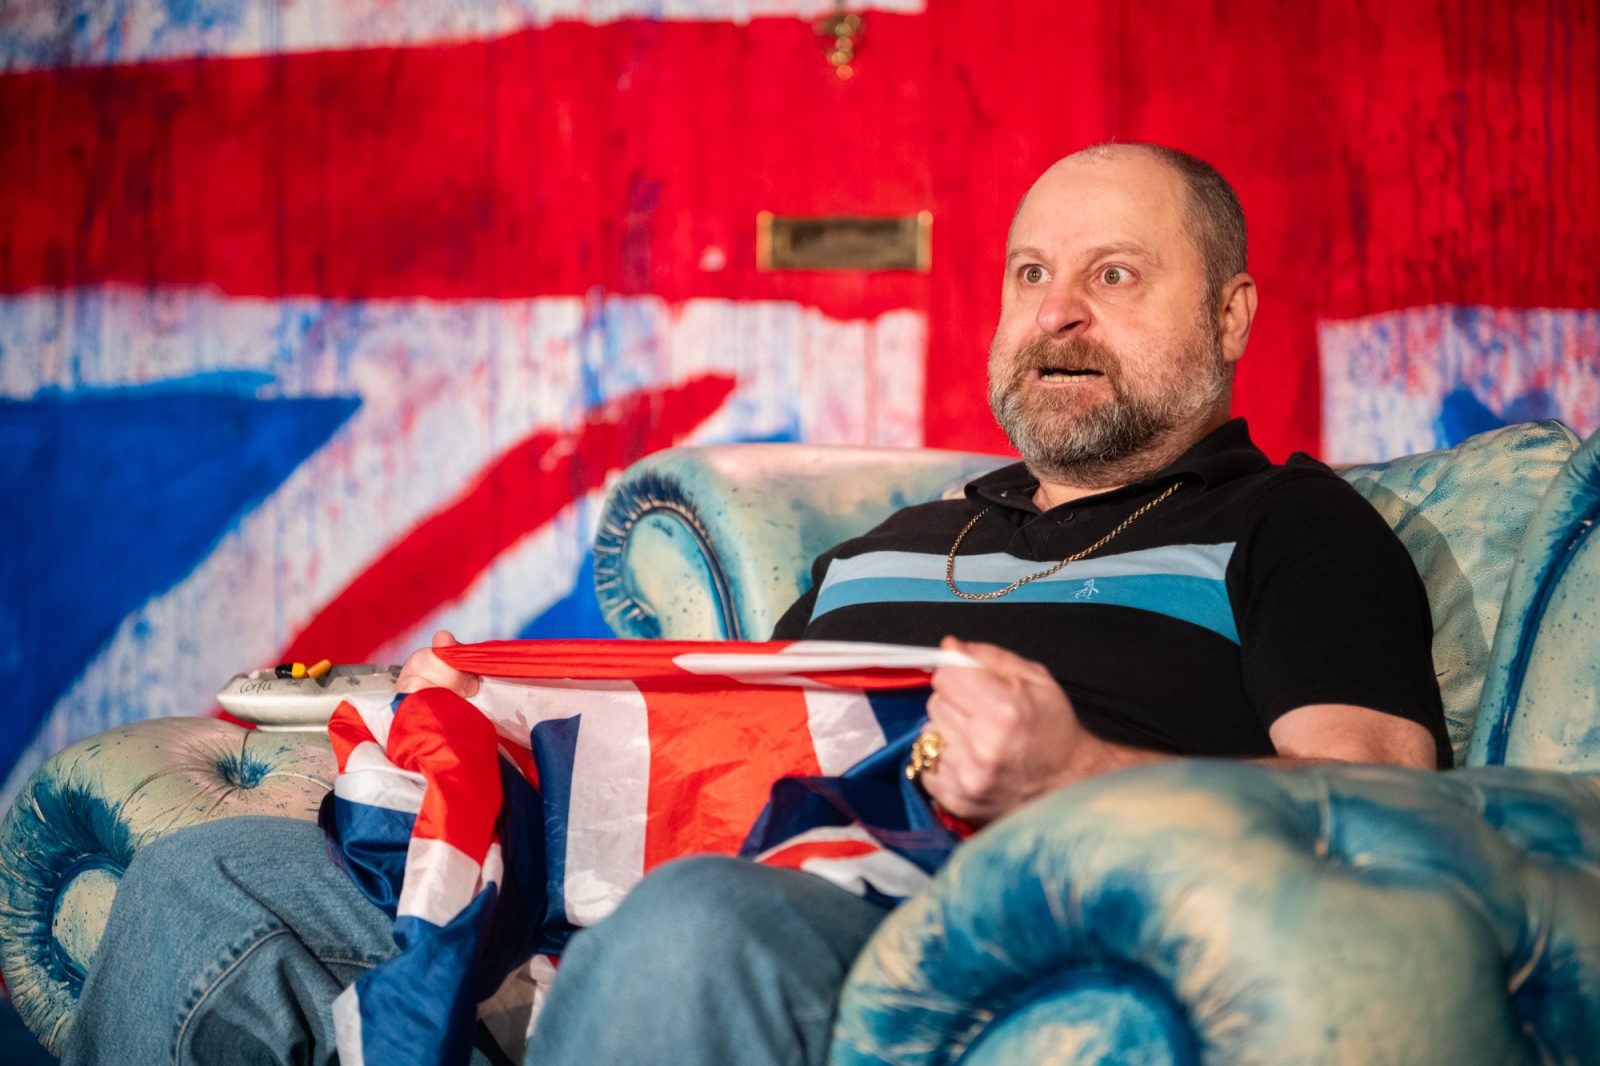 Harry Ward on stage for FLEG, sitting in an armchair holding a Union flag.